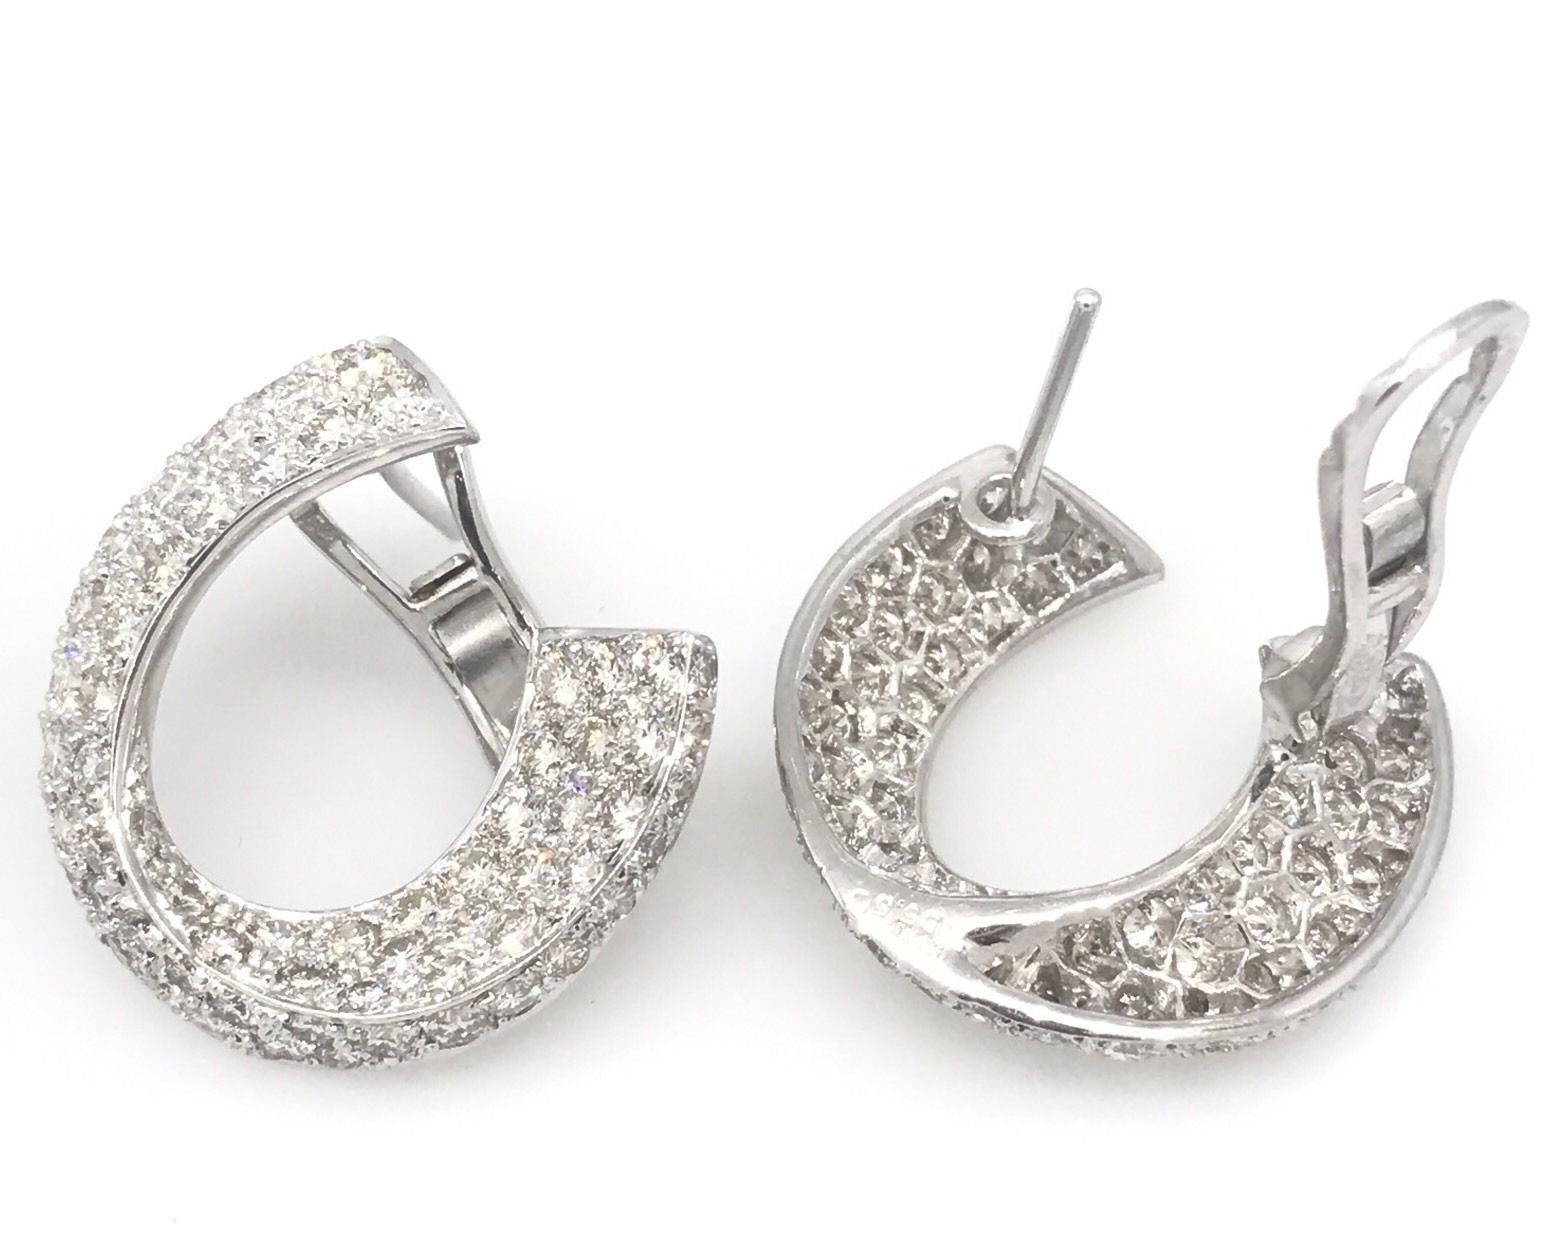 Pave-set diamond earrings in shape of crescent in 18K white gold containing 5.50 carats of round brilliant cut diamonds with color of H and clarity VS. Earrings weigh 13.7 grams. Marks: K18WG, D5.50.